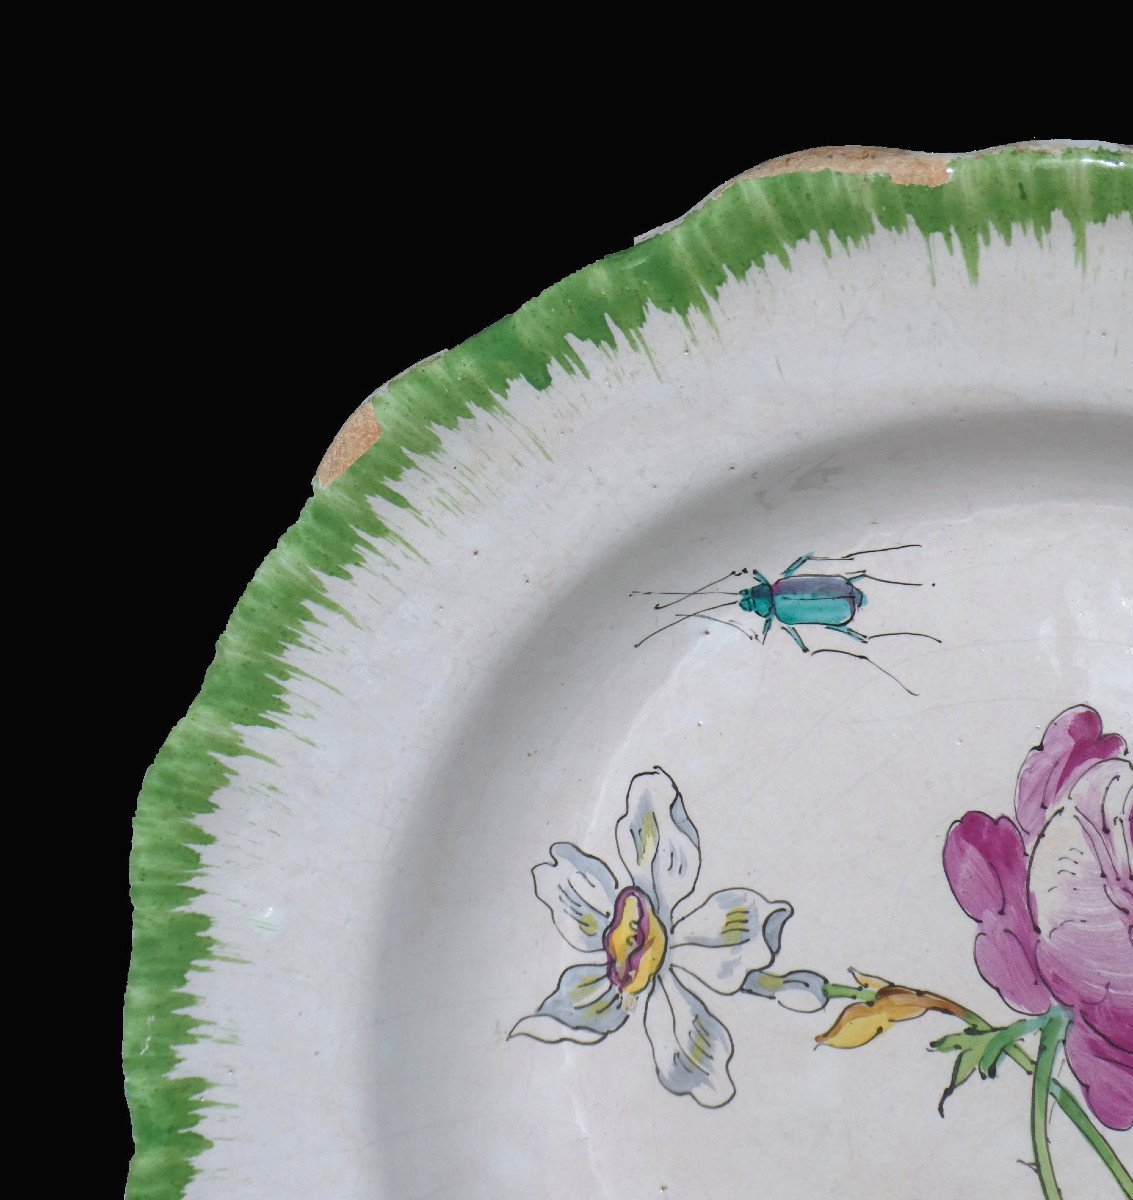 18th Century Earthenware Plate From The Widow Perrin's Workshop In Marseille, Decorated With Flowers & Insects-photo-4